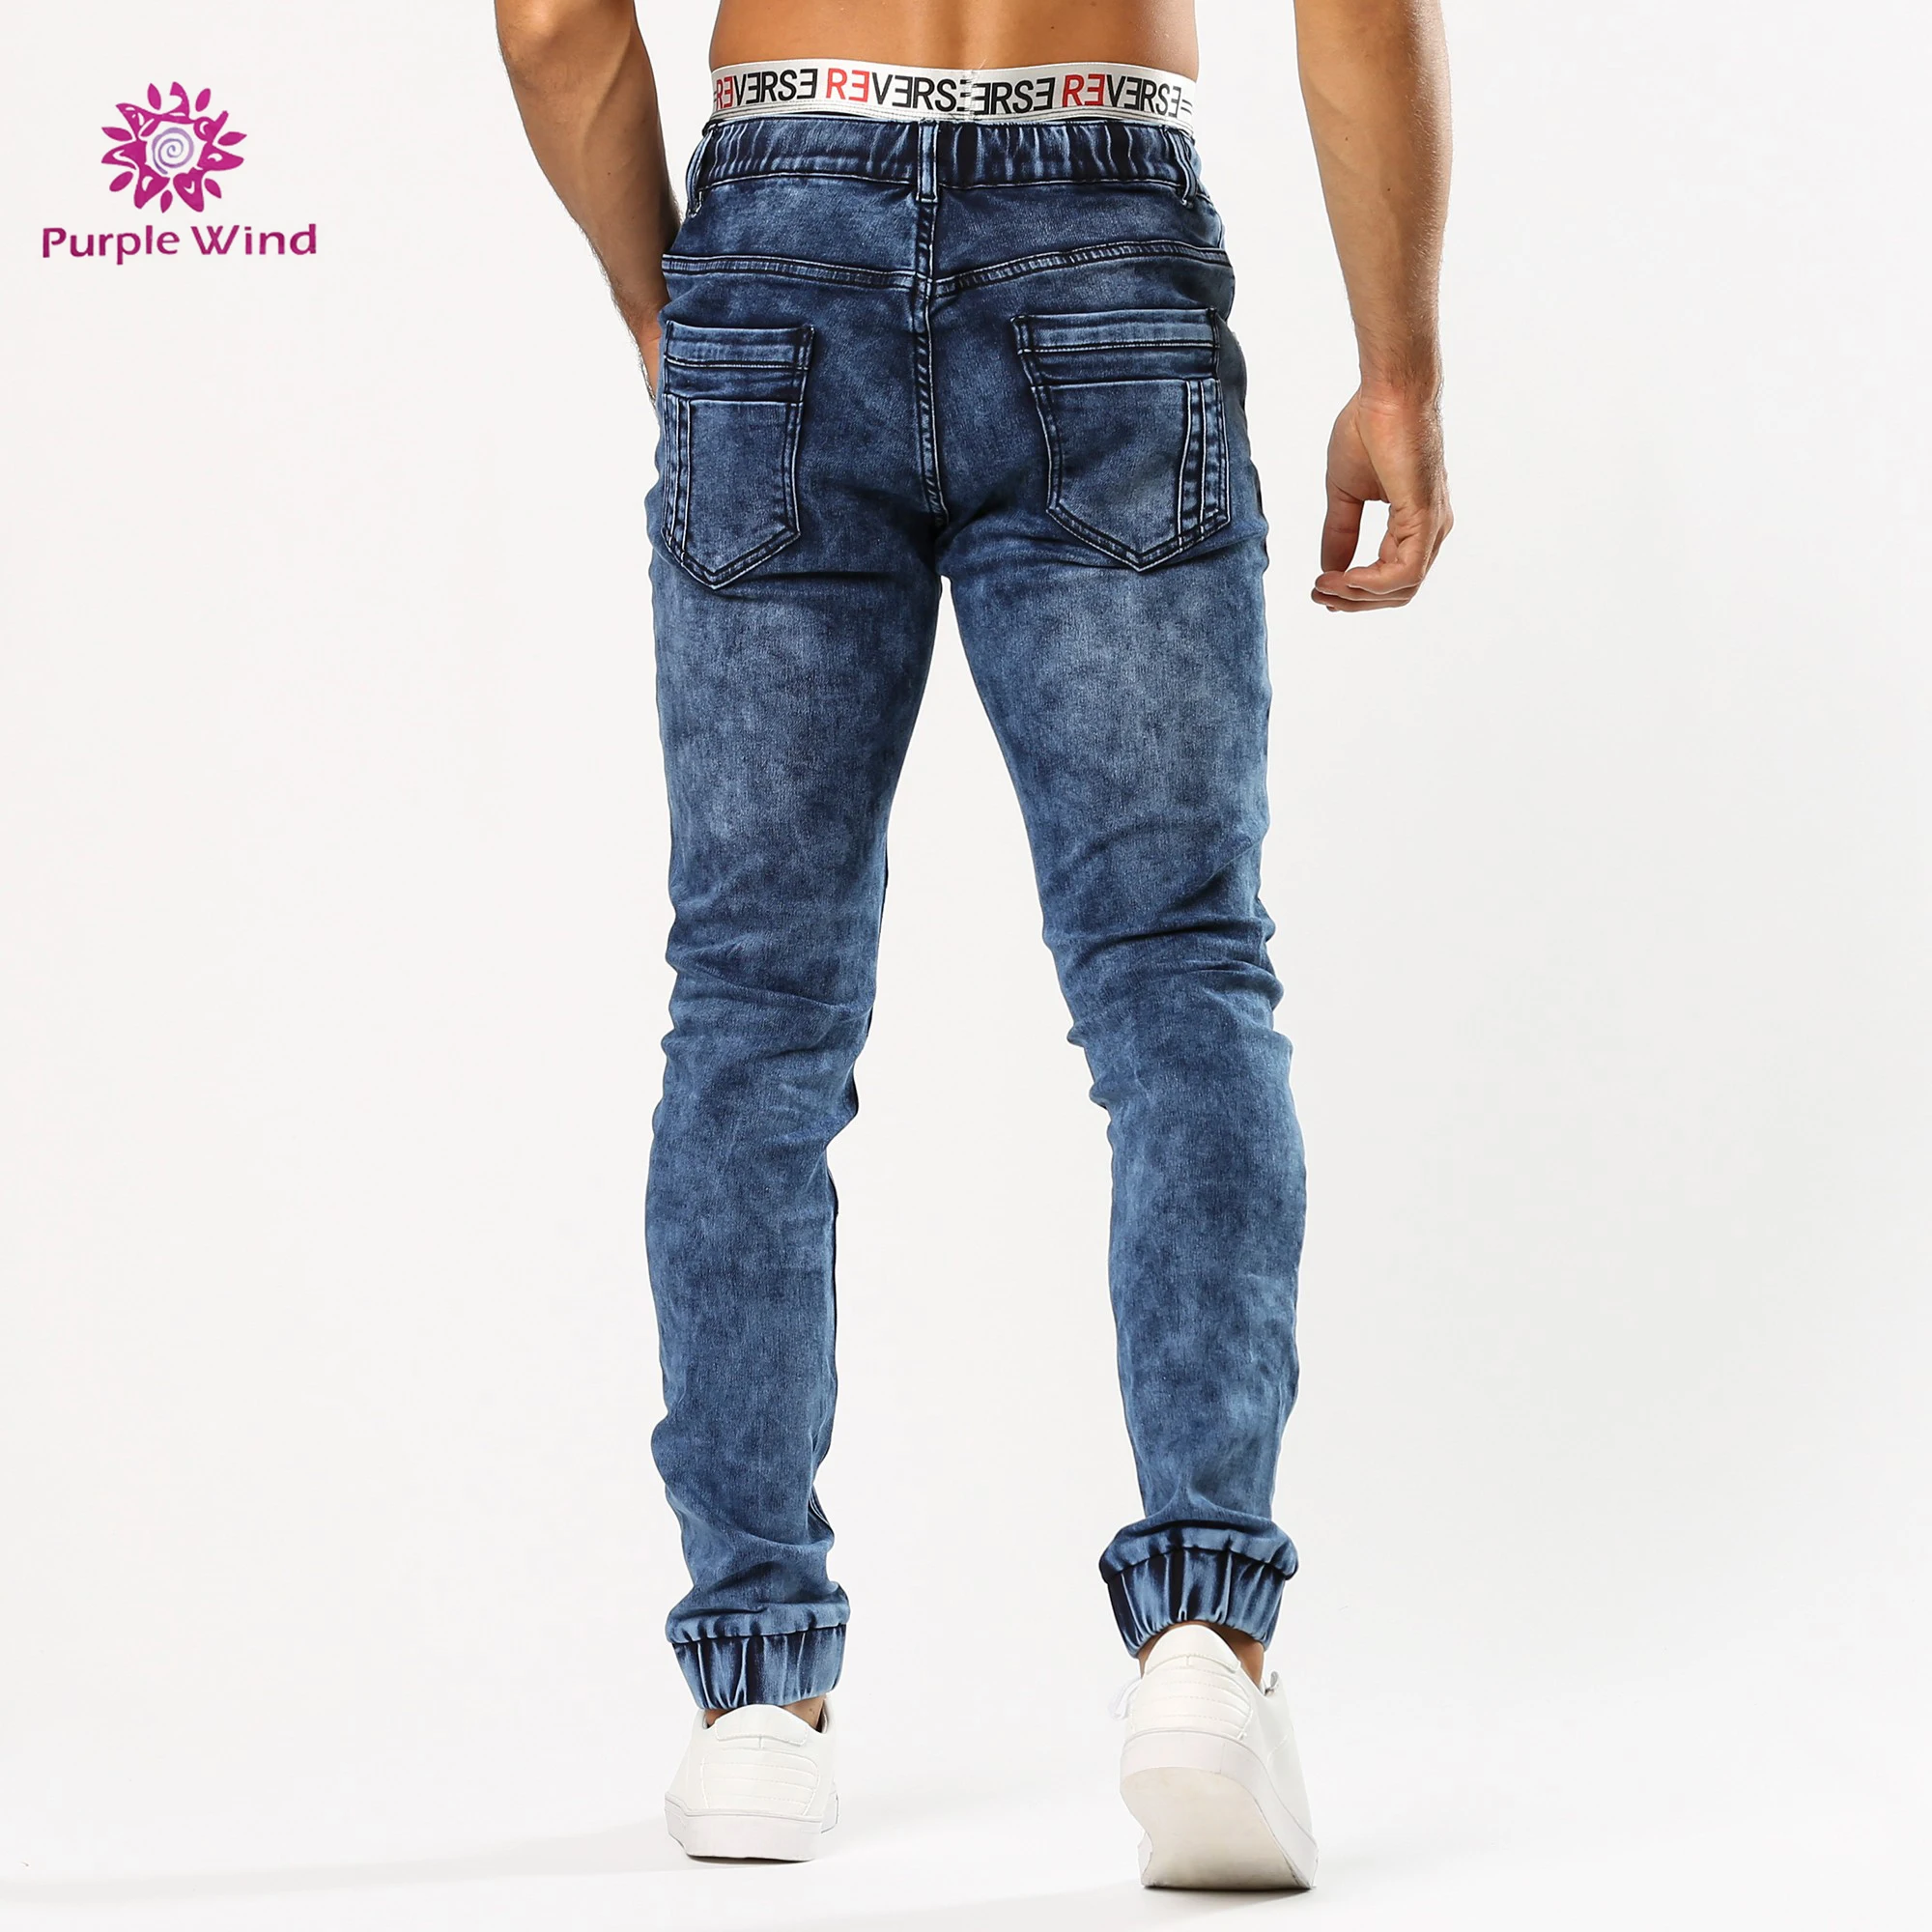 mens jogger style jeans